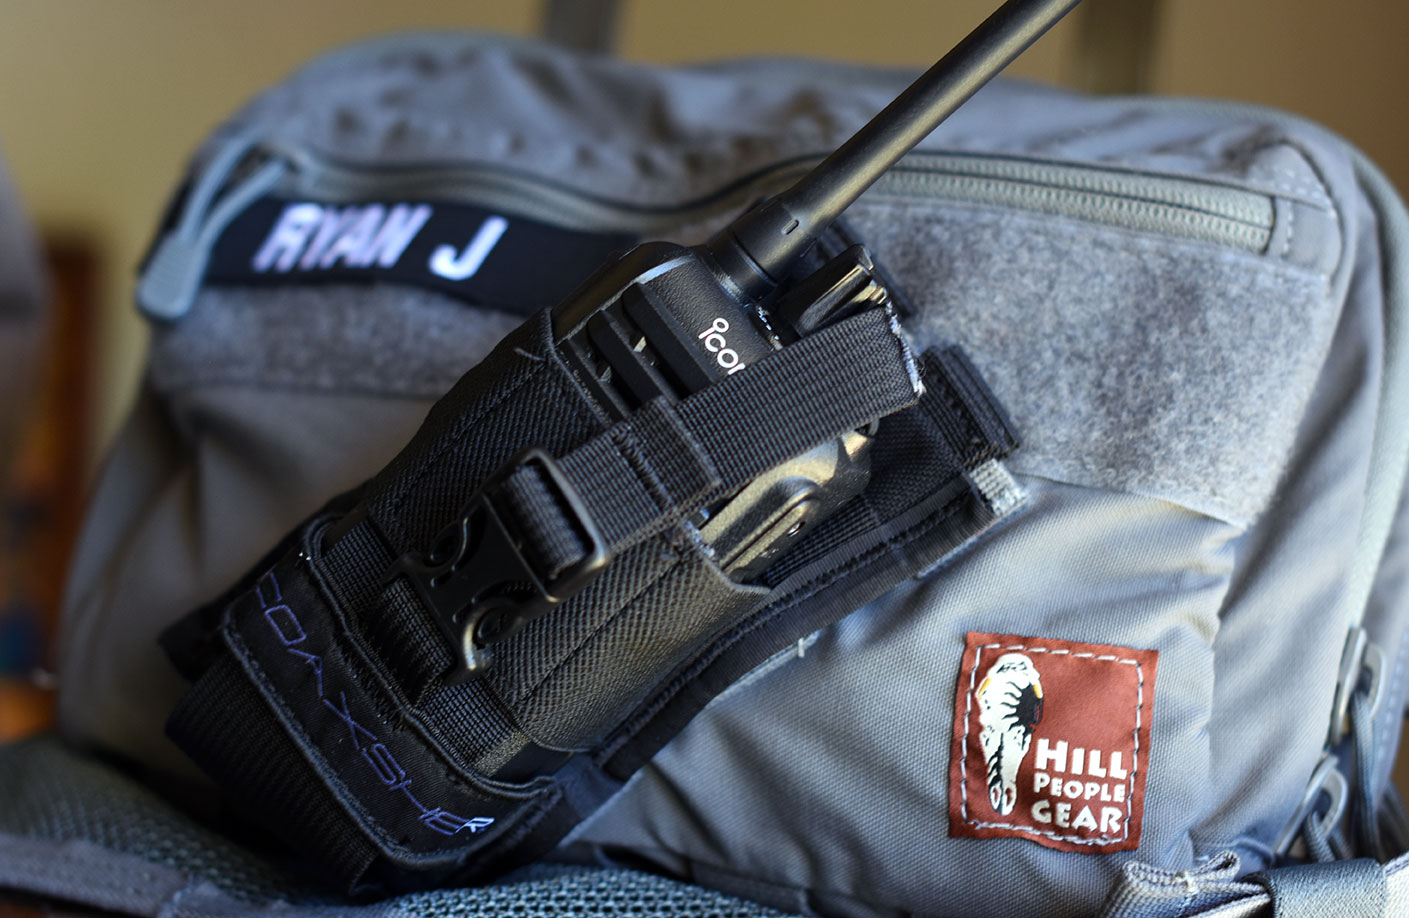 Gray Hill People Gear chest bag with radio harness with an iCom radio attached, and a name badge that reads Ryan J with a Hill People Gear rust colored badge at lower end of the bag